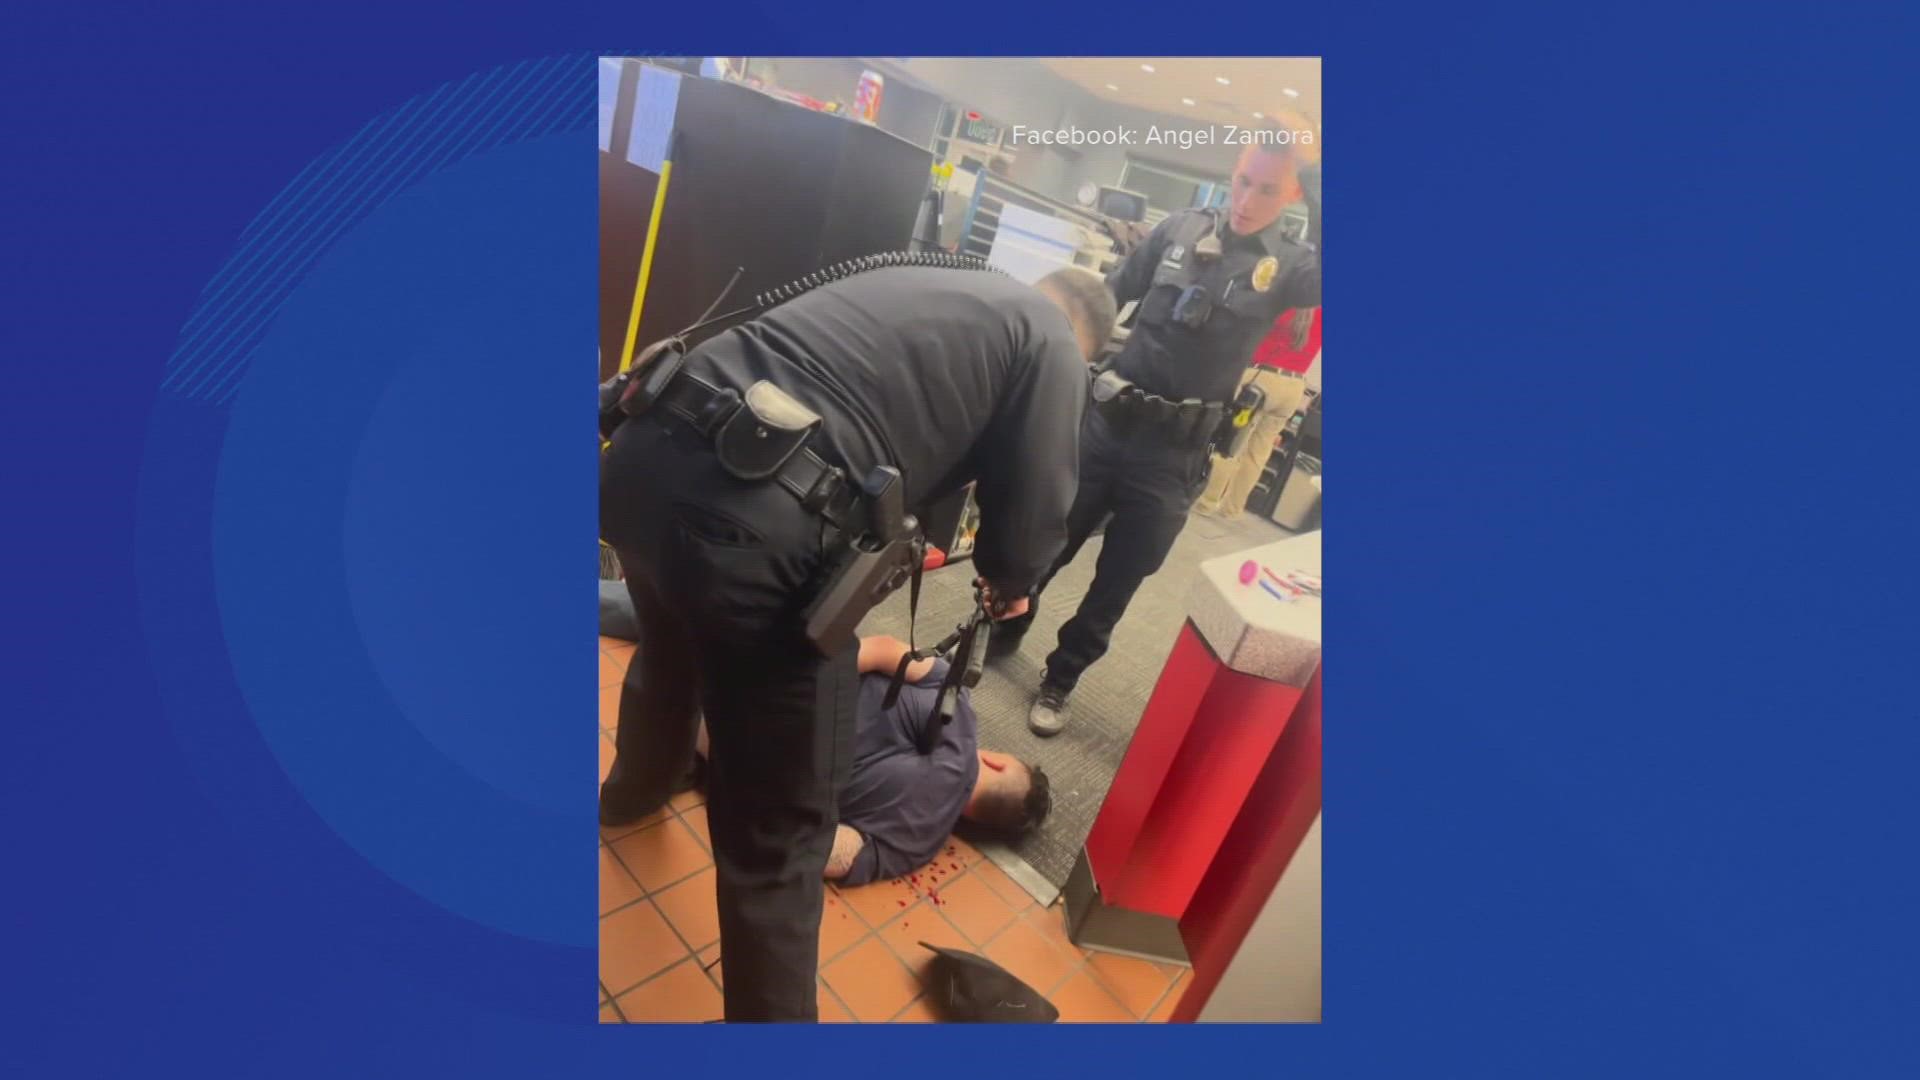 In a video, which a bystander shot, officers are seen kicking the man while he was facedown and prone on the ground before being fully handcuffed.